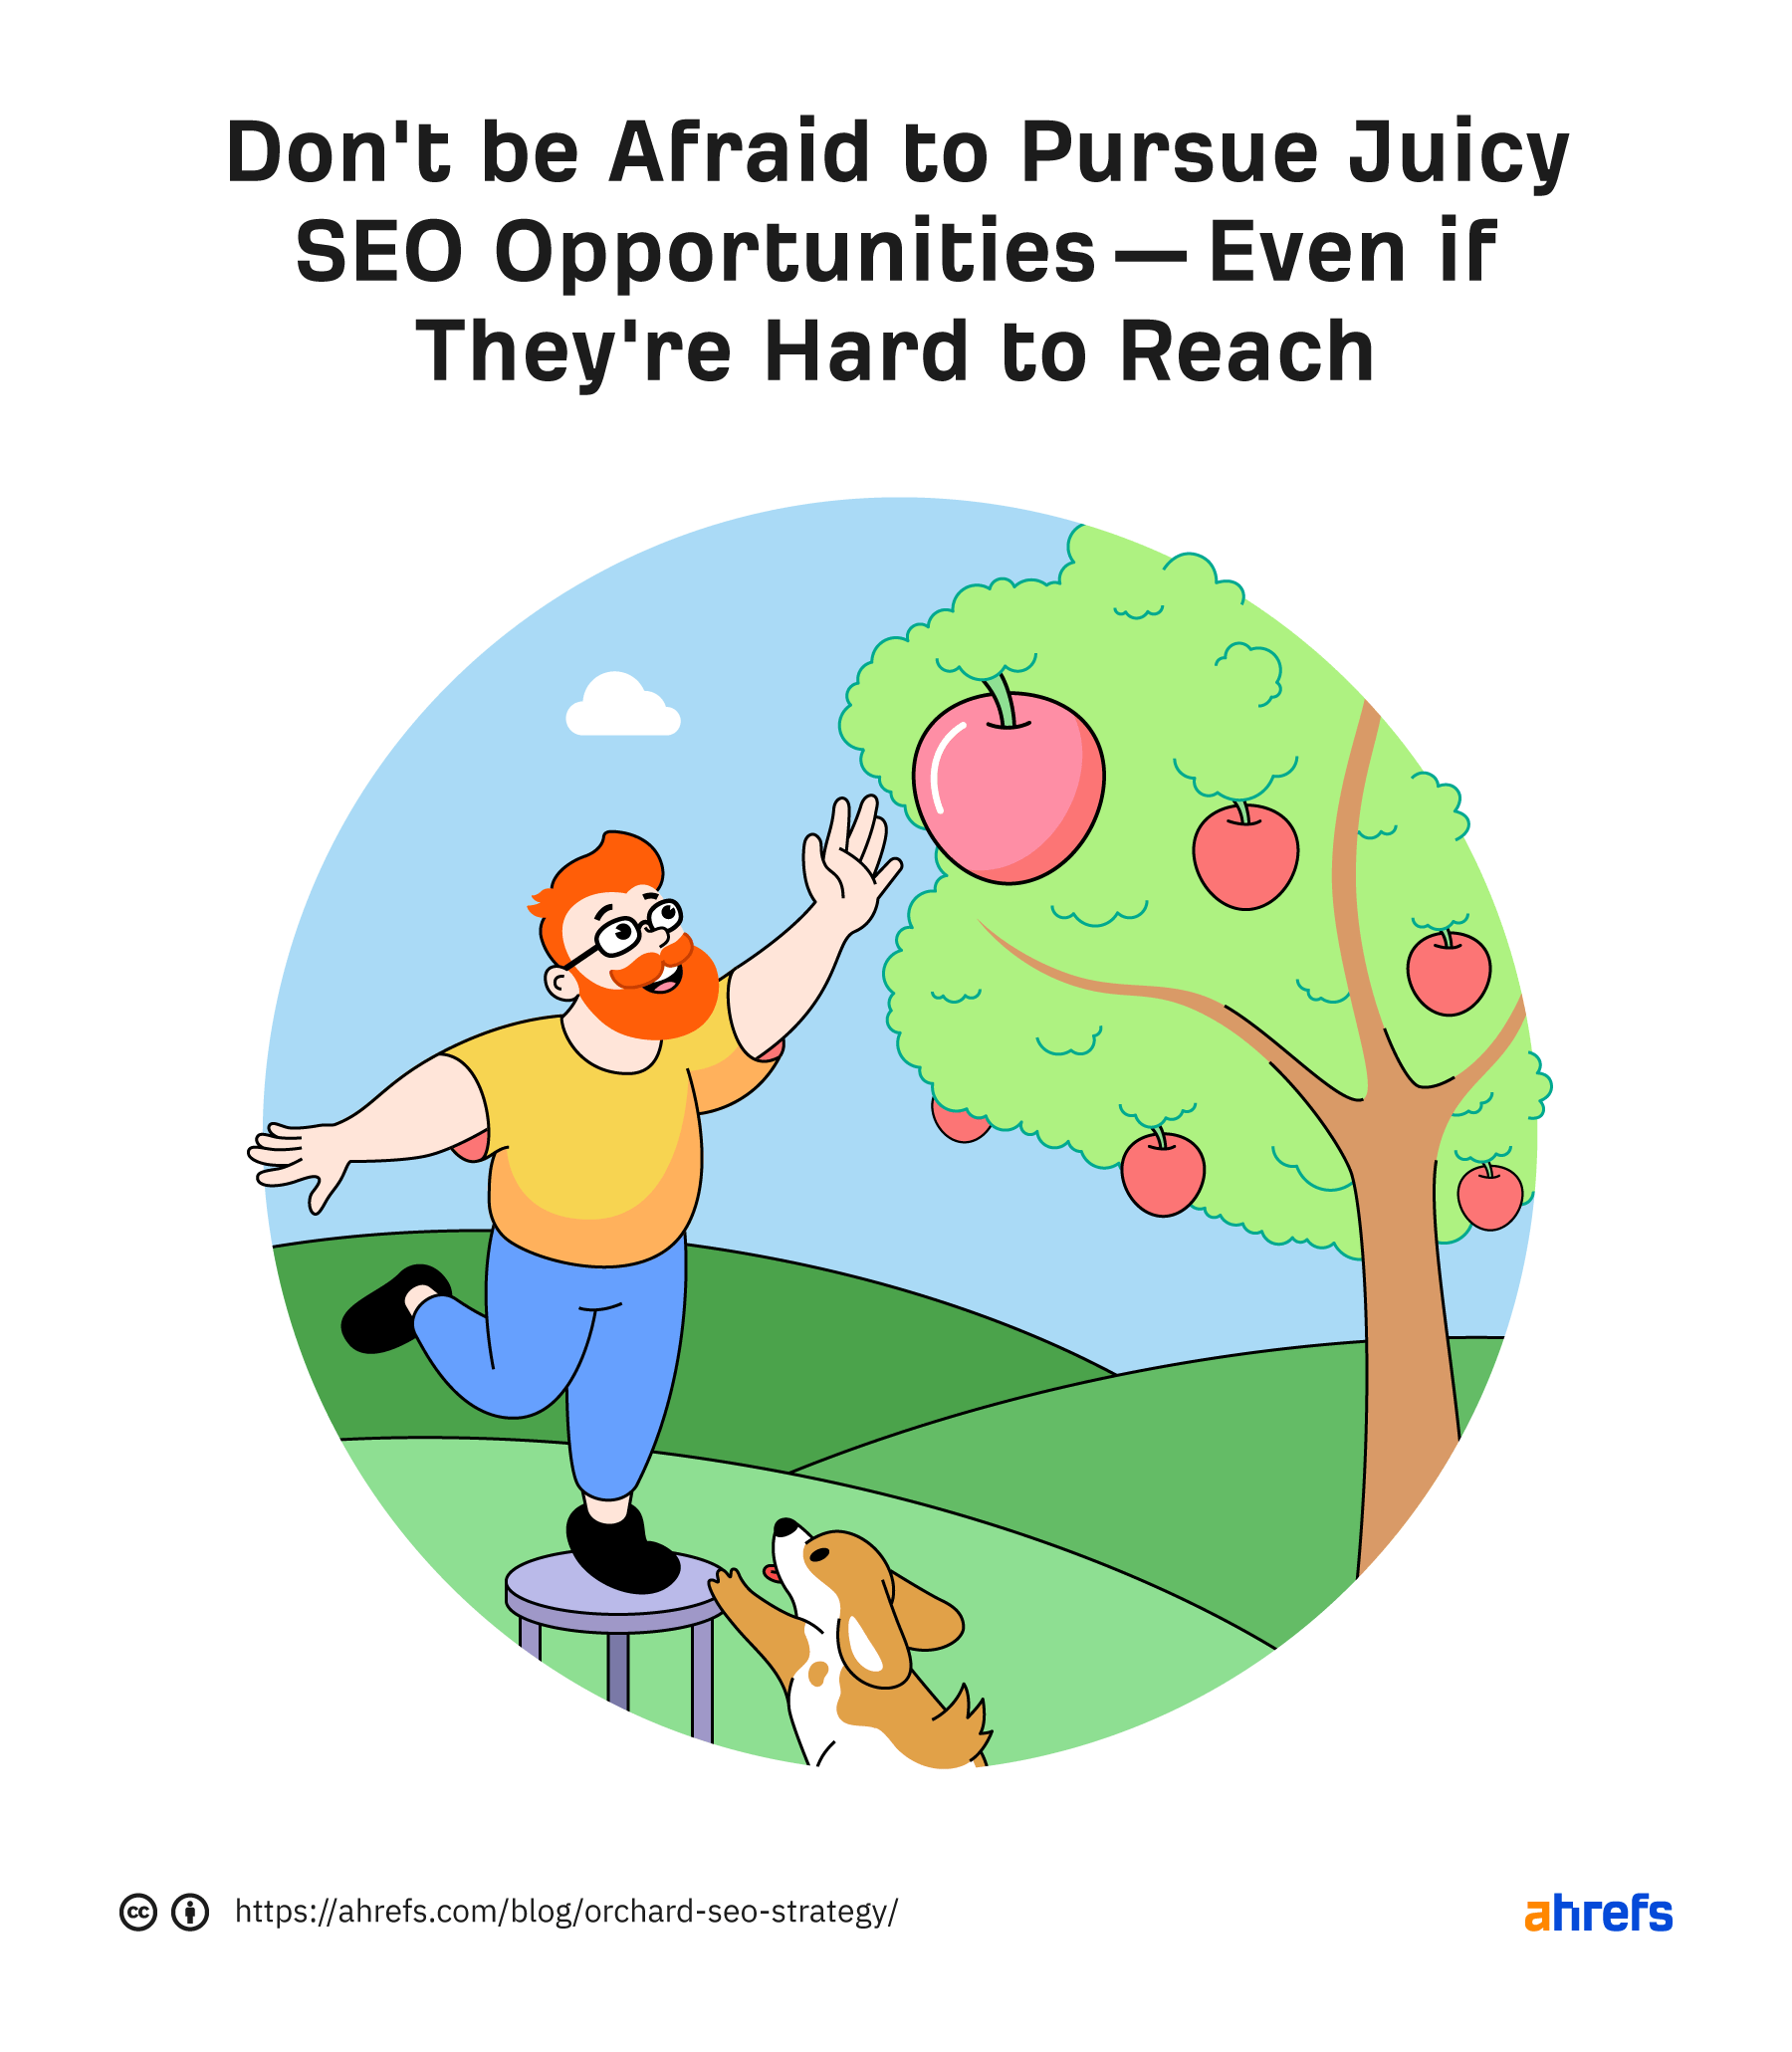 Don't be afraid to pursue juicy SEO opportunities - even if they're hard to reach